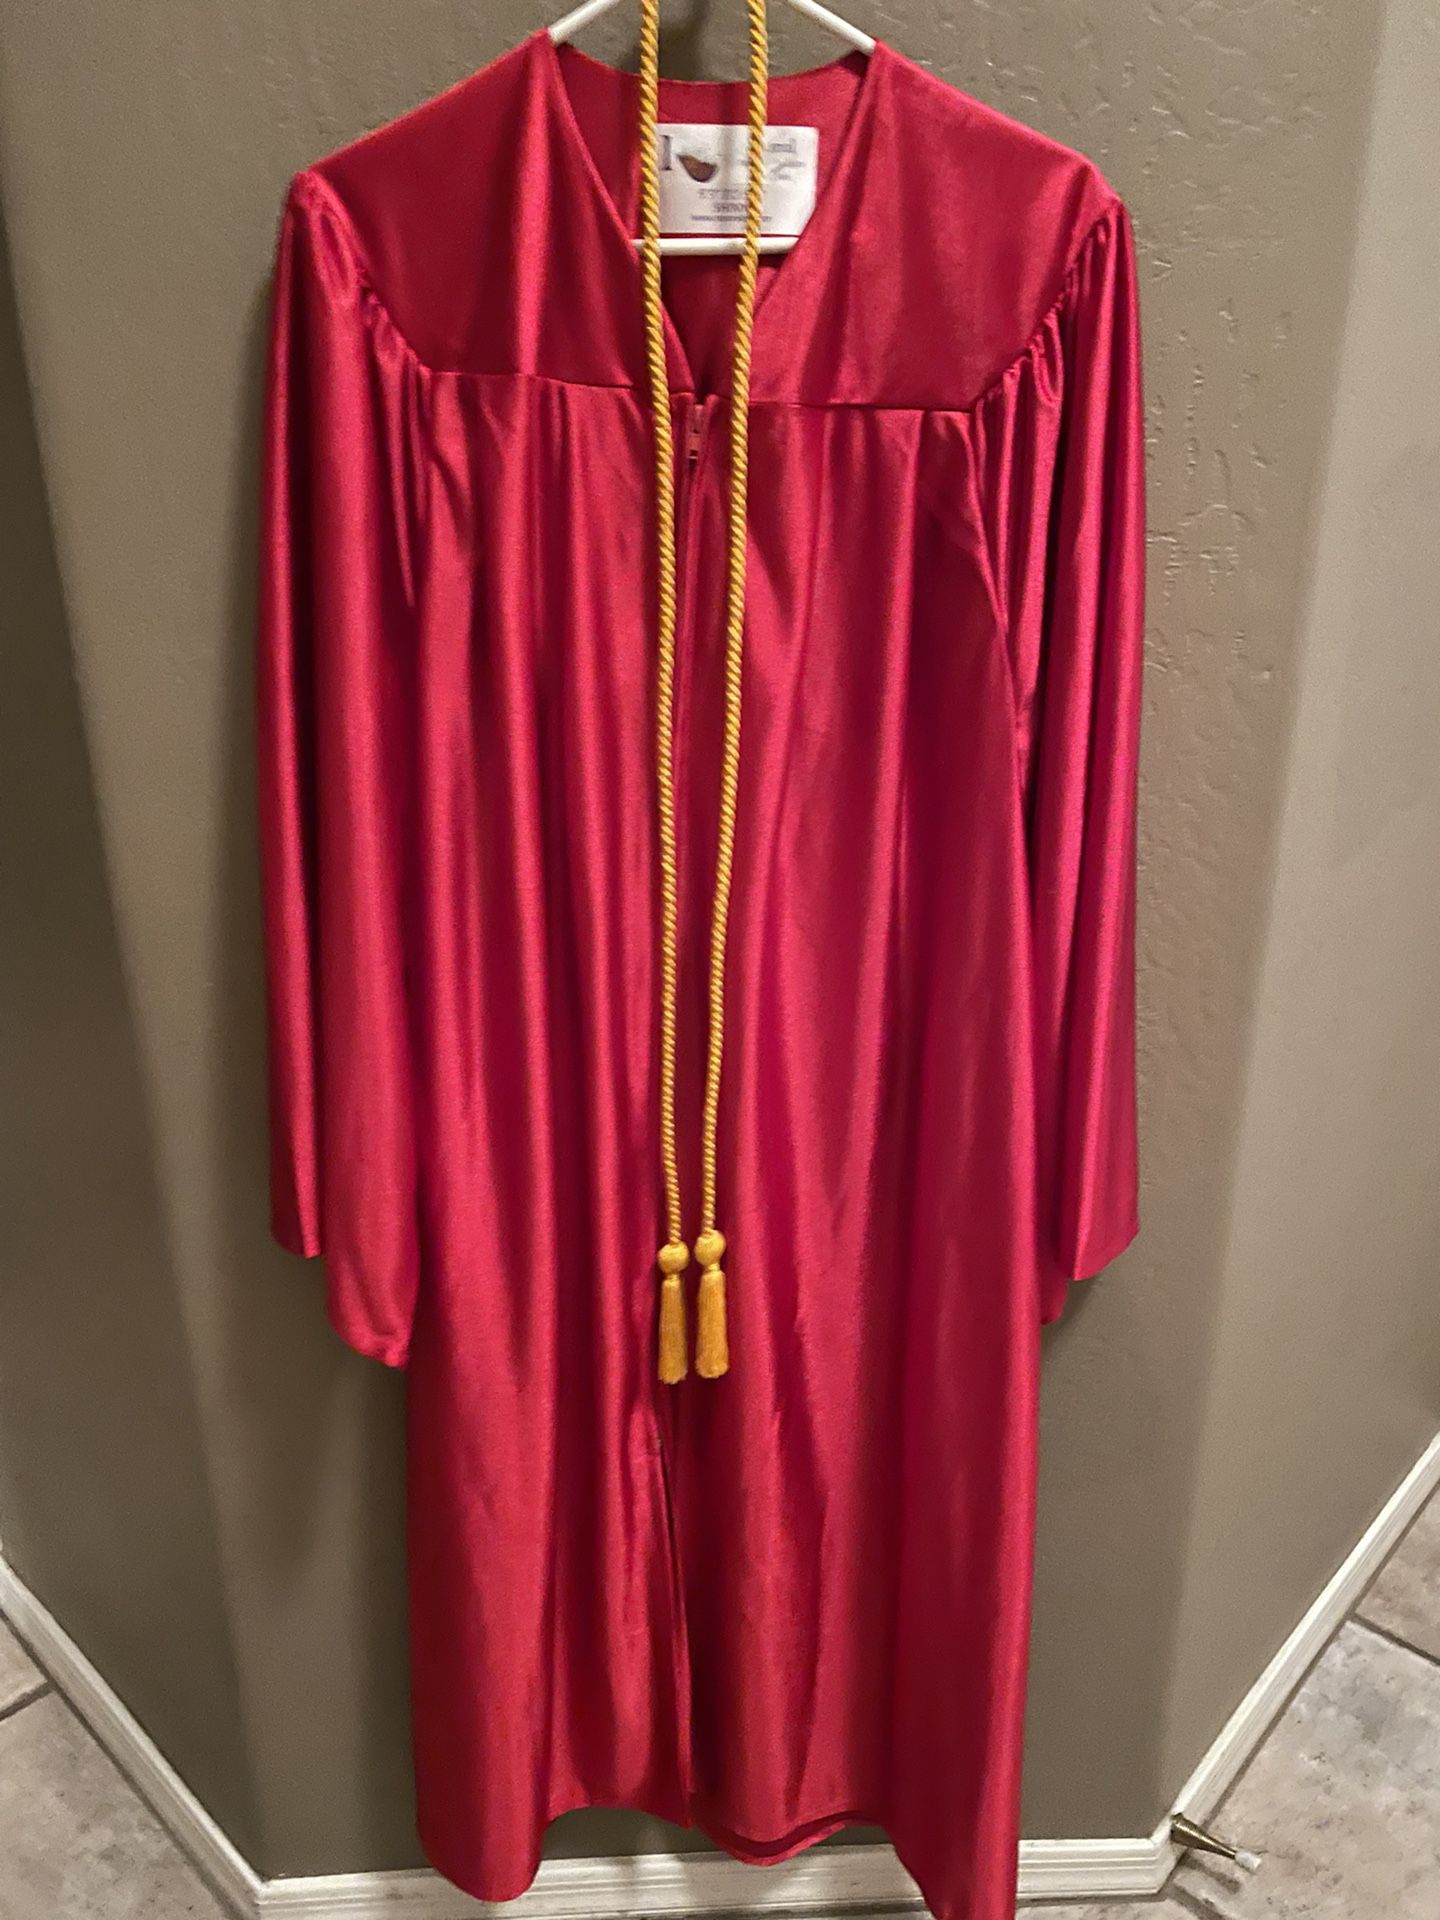 RED GRADUATION GOWN- Like NEW (Halloween Costume) 